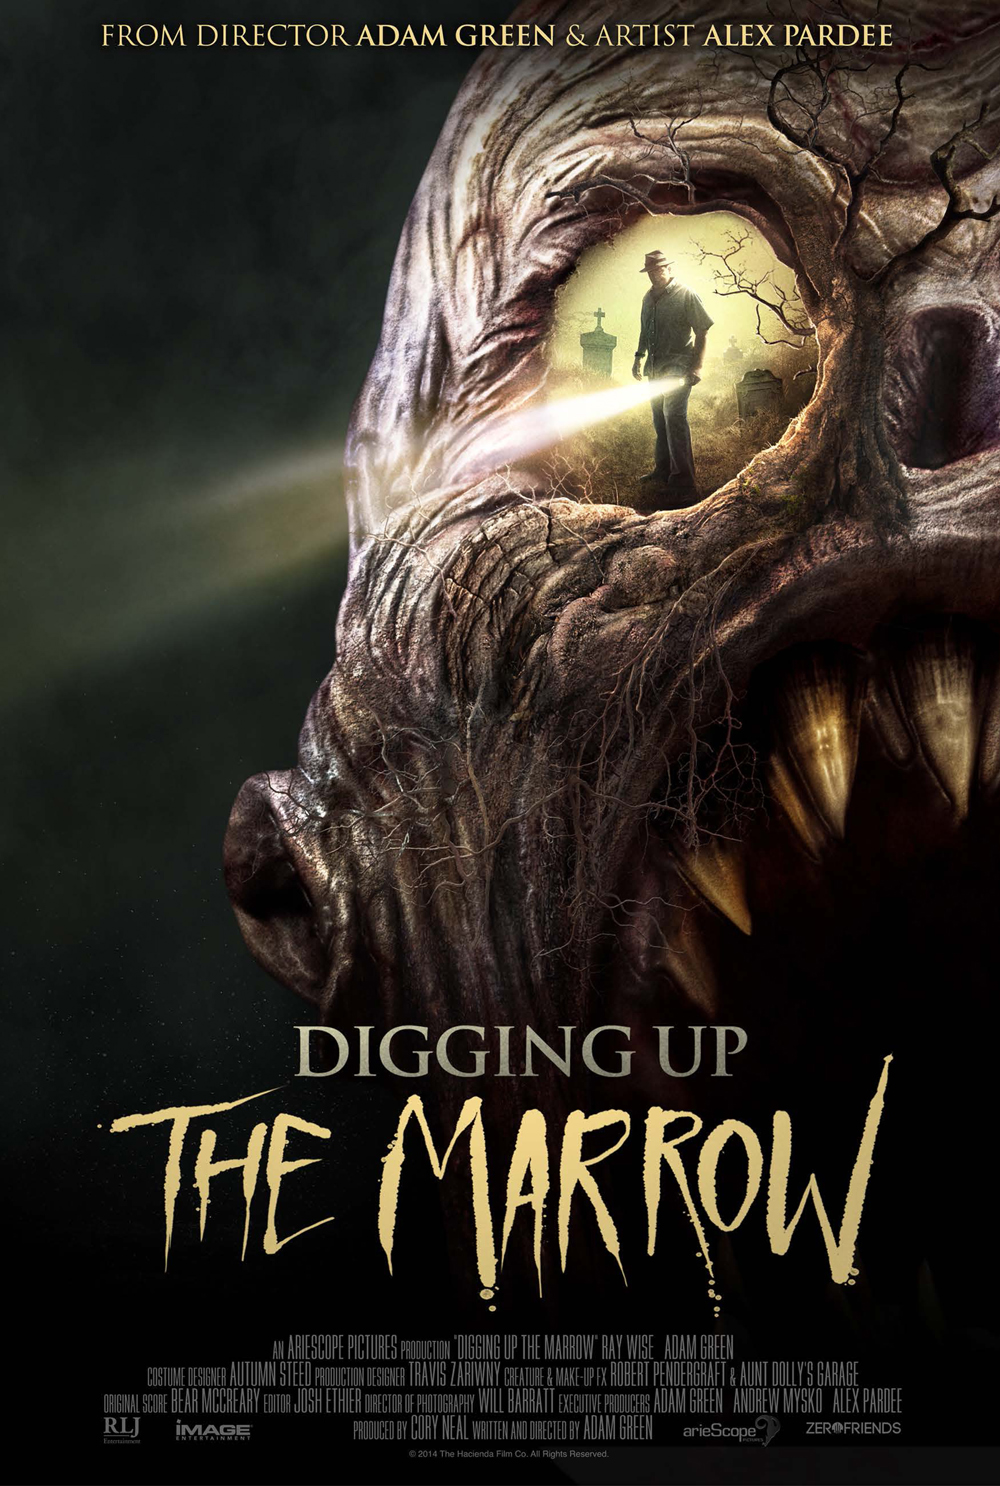 [Review] Digging Up The Marrow